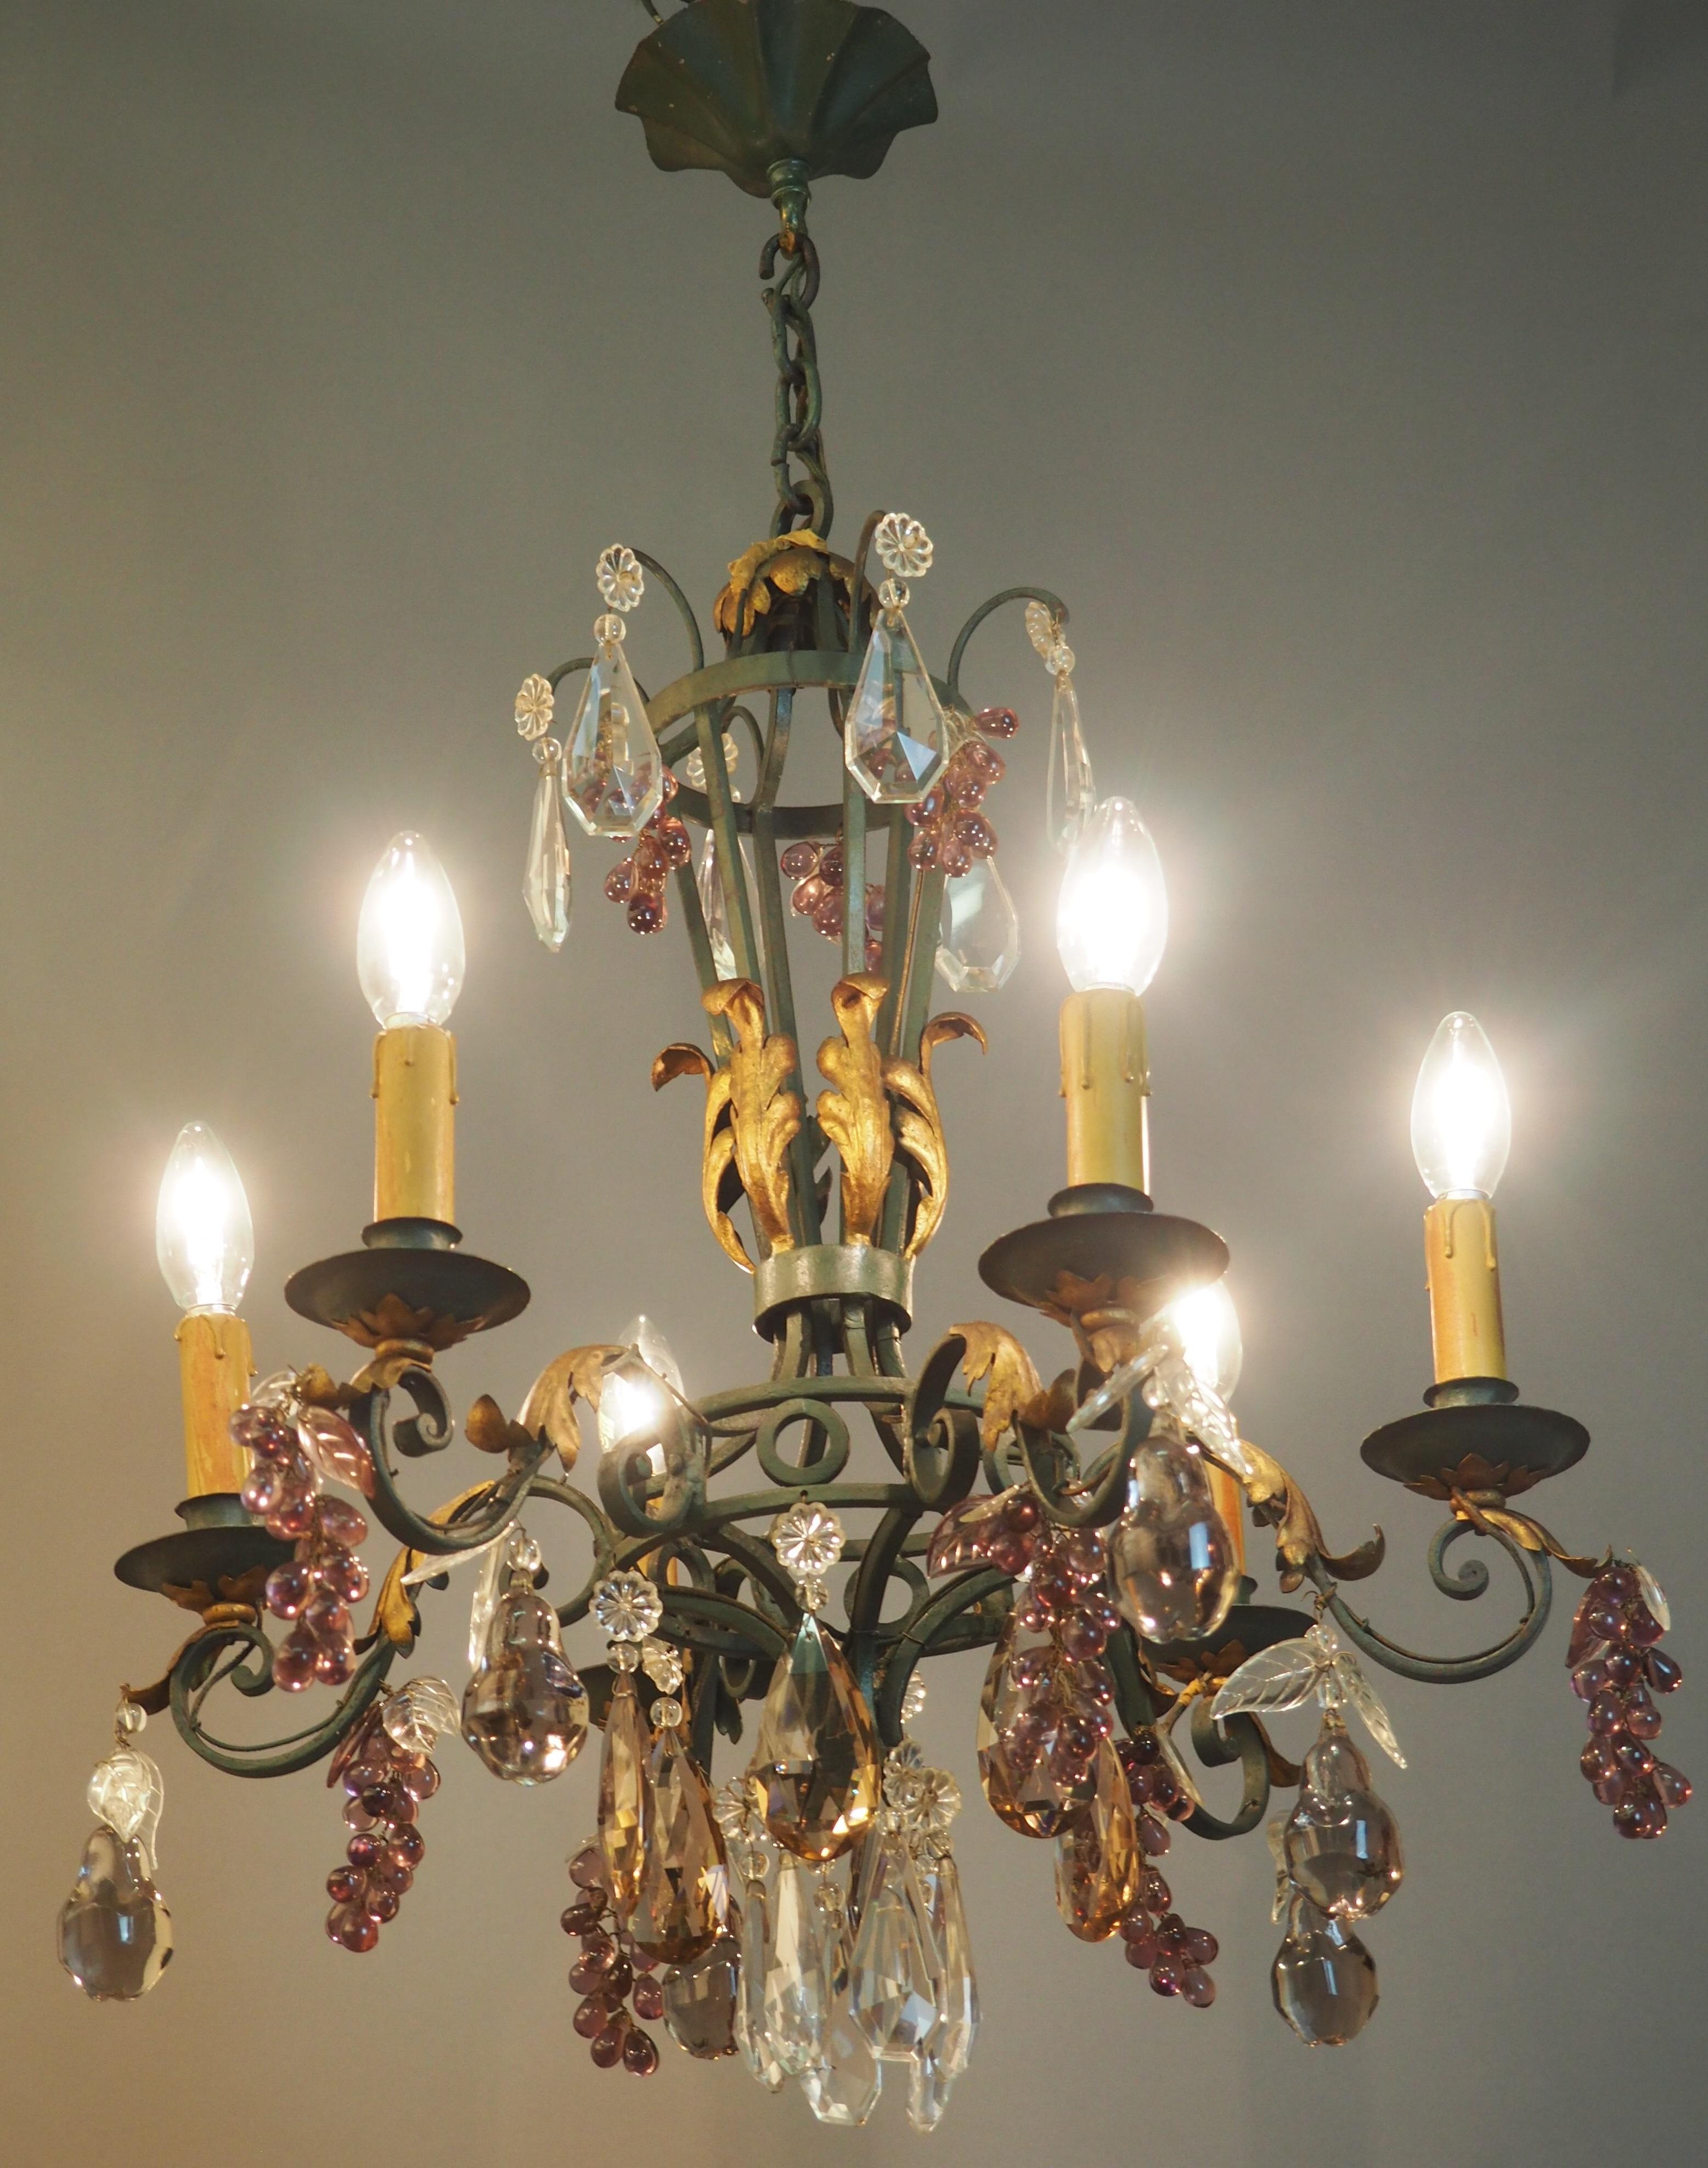 Green Painted and Gilt Wrought Iron Amethyst Chandelier with Fruits, 1900s For Sale 1